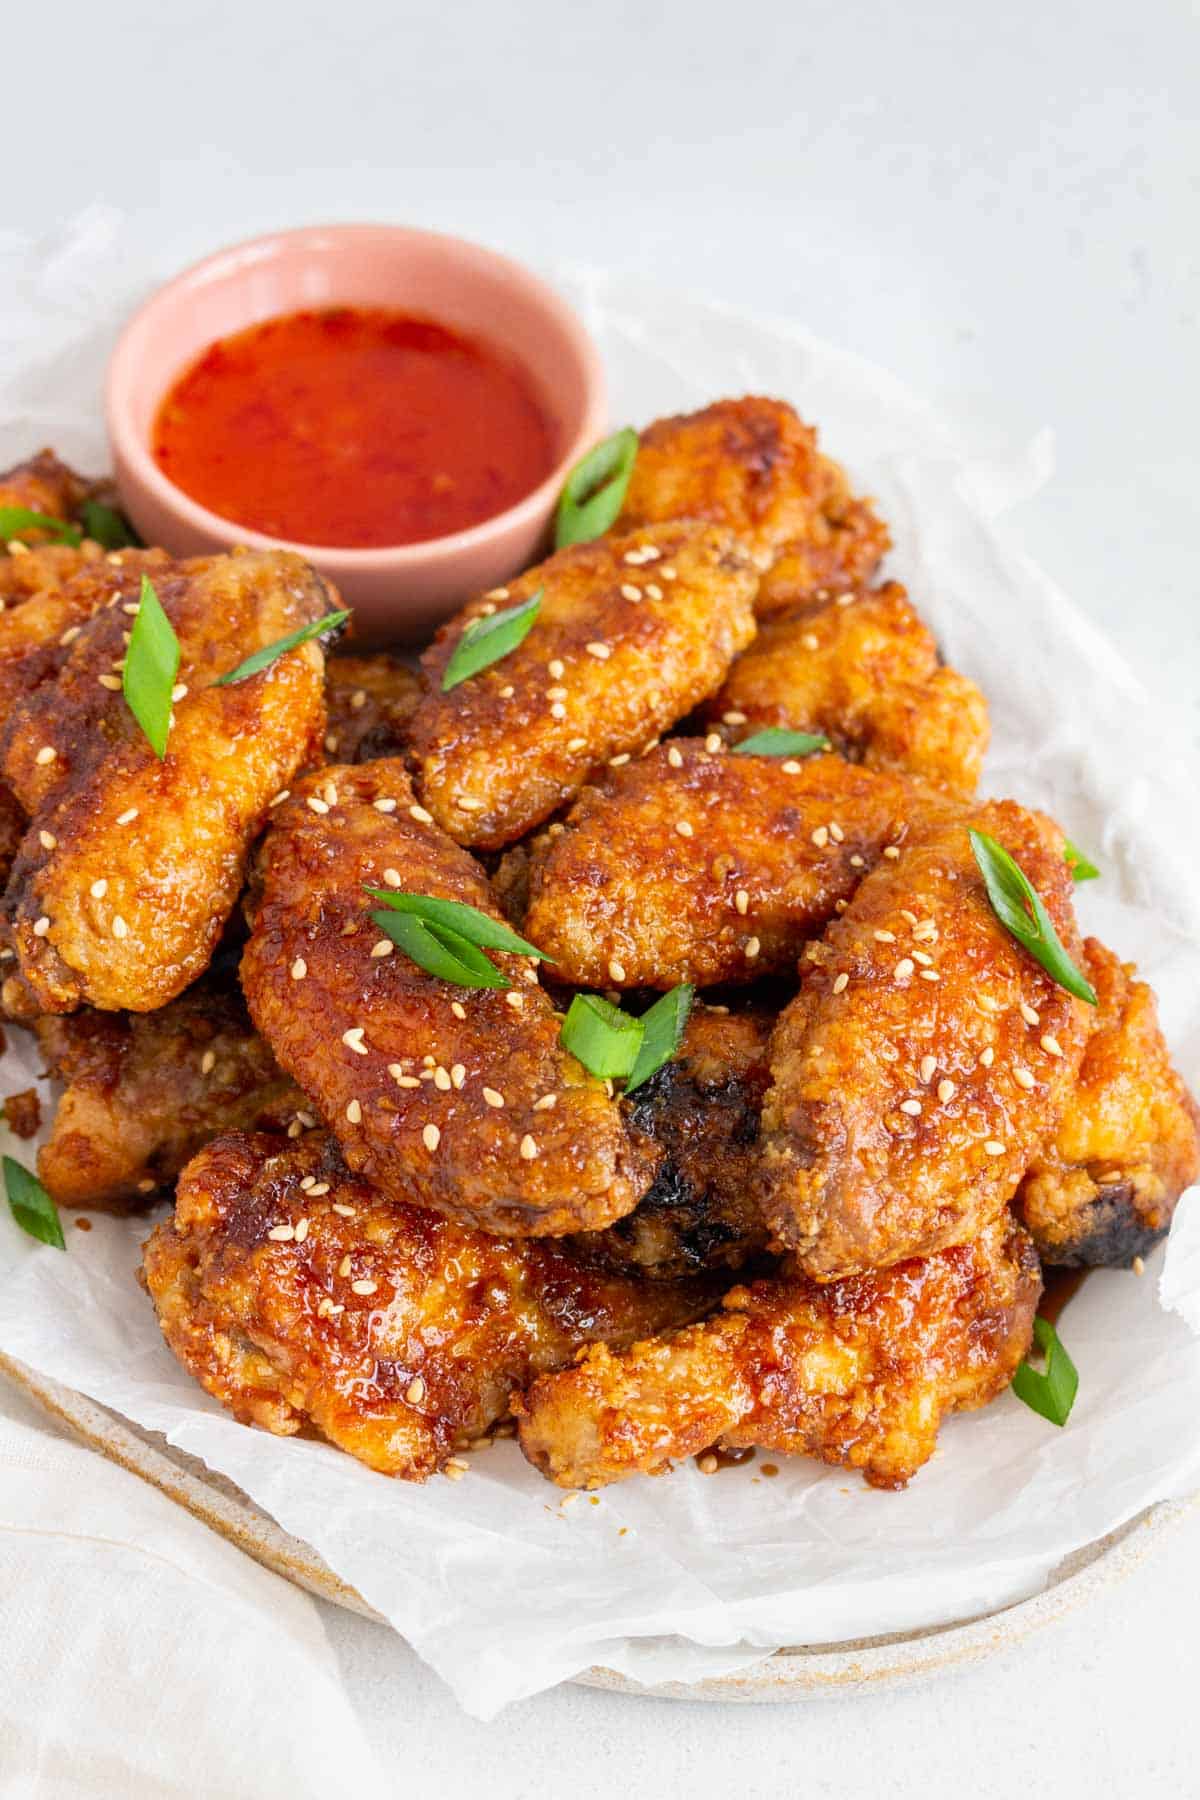 Angled view of a platter of soy garlic chicken wings.